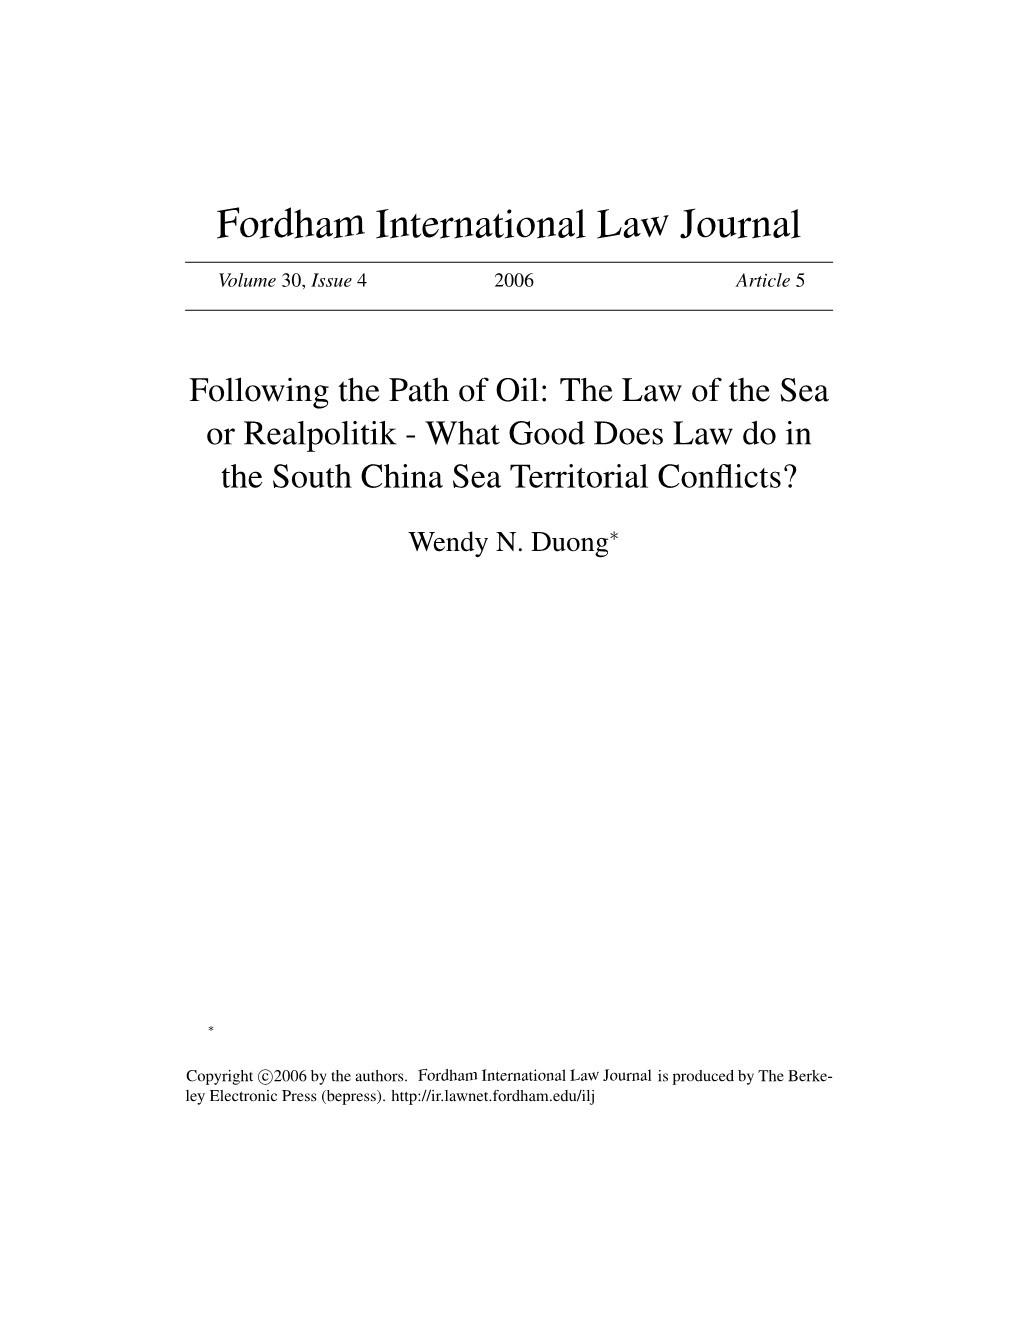 What Good Does Law Do in the South China Sea Territorial Conflicts?